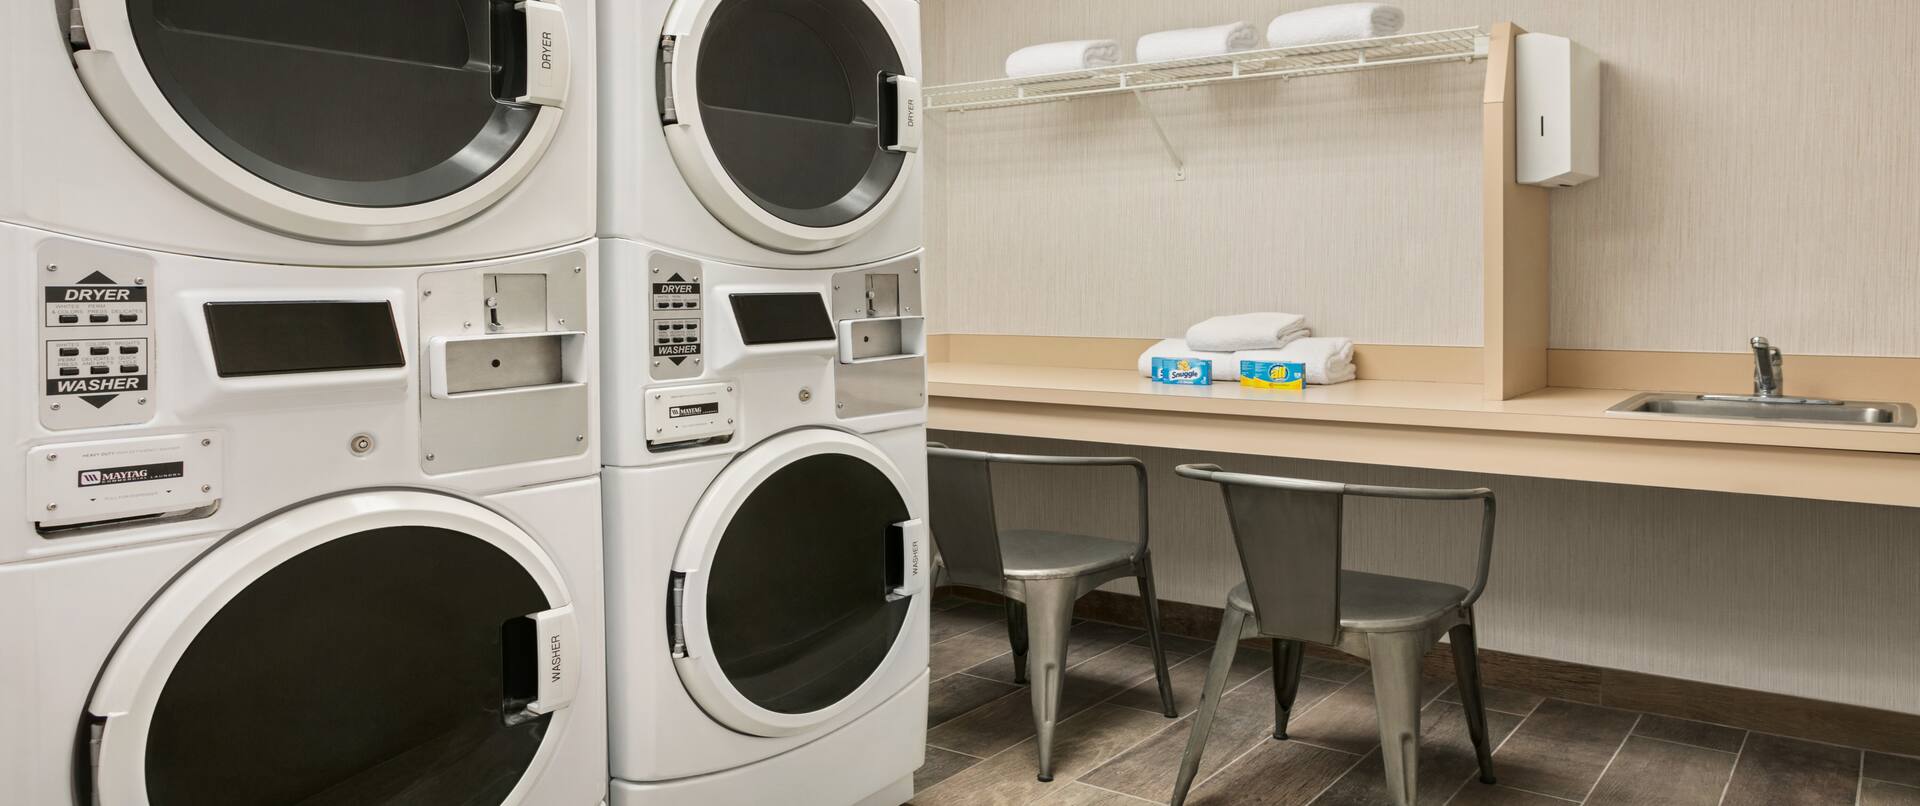 Laundry area with machines and waiting area